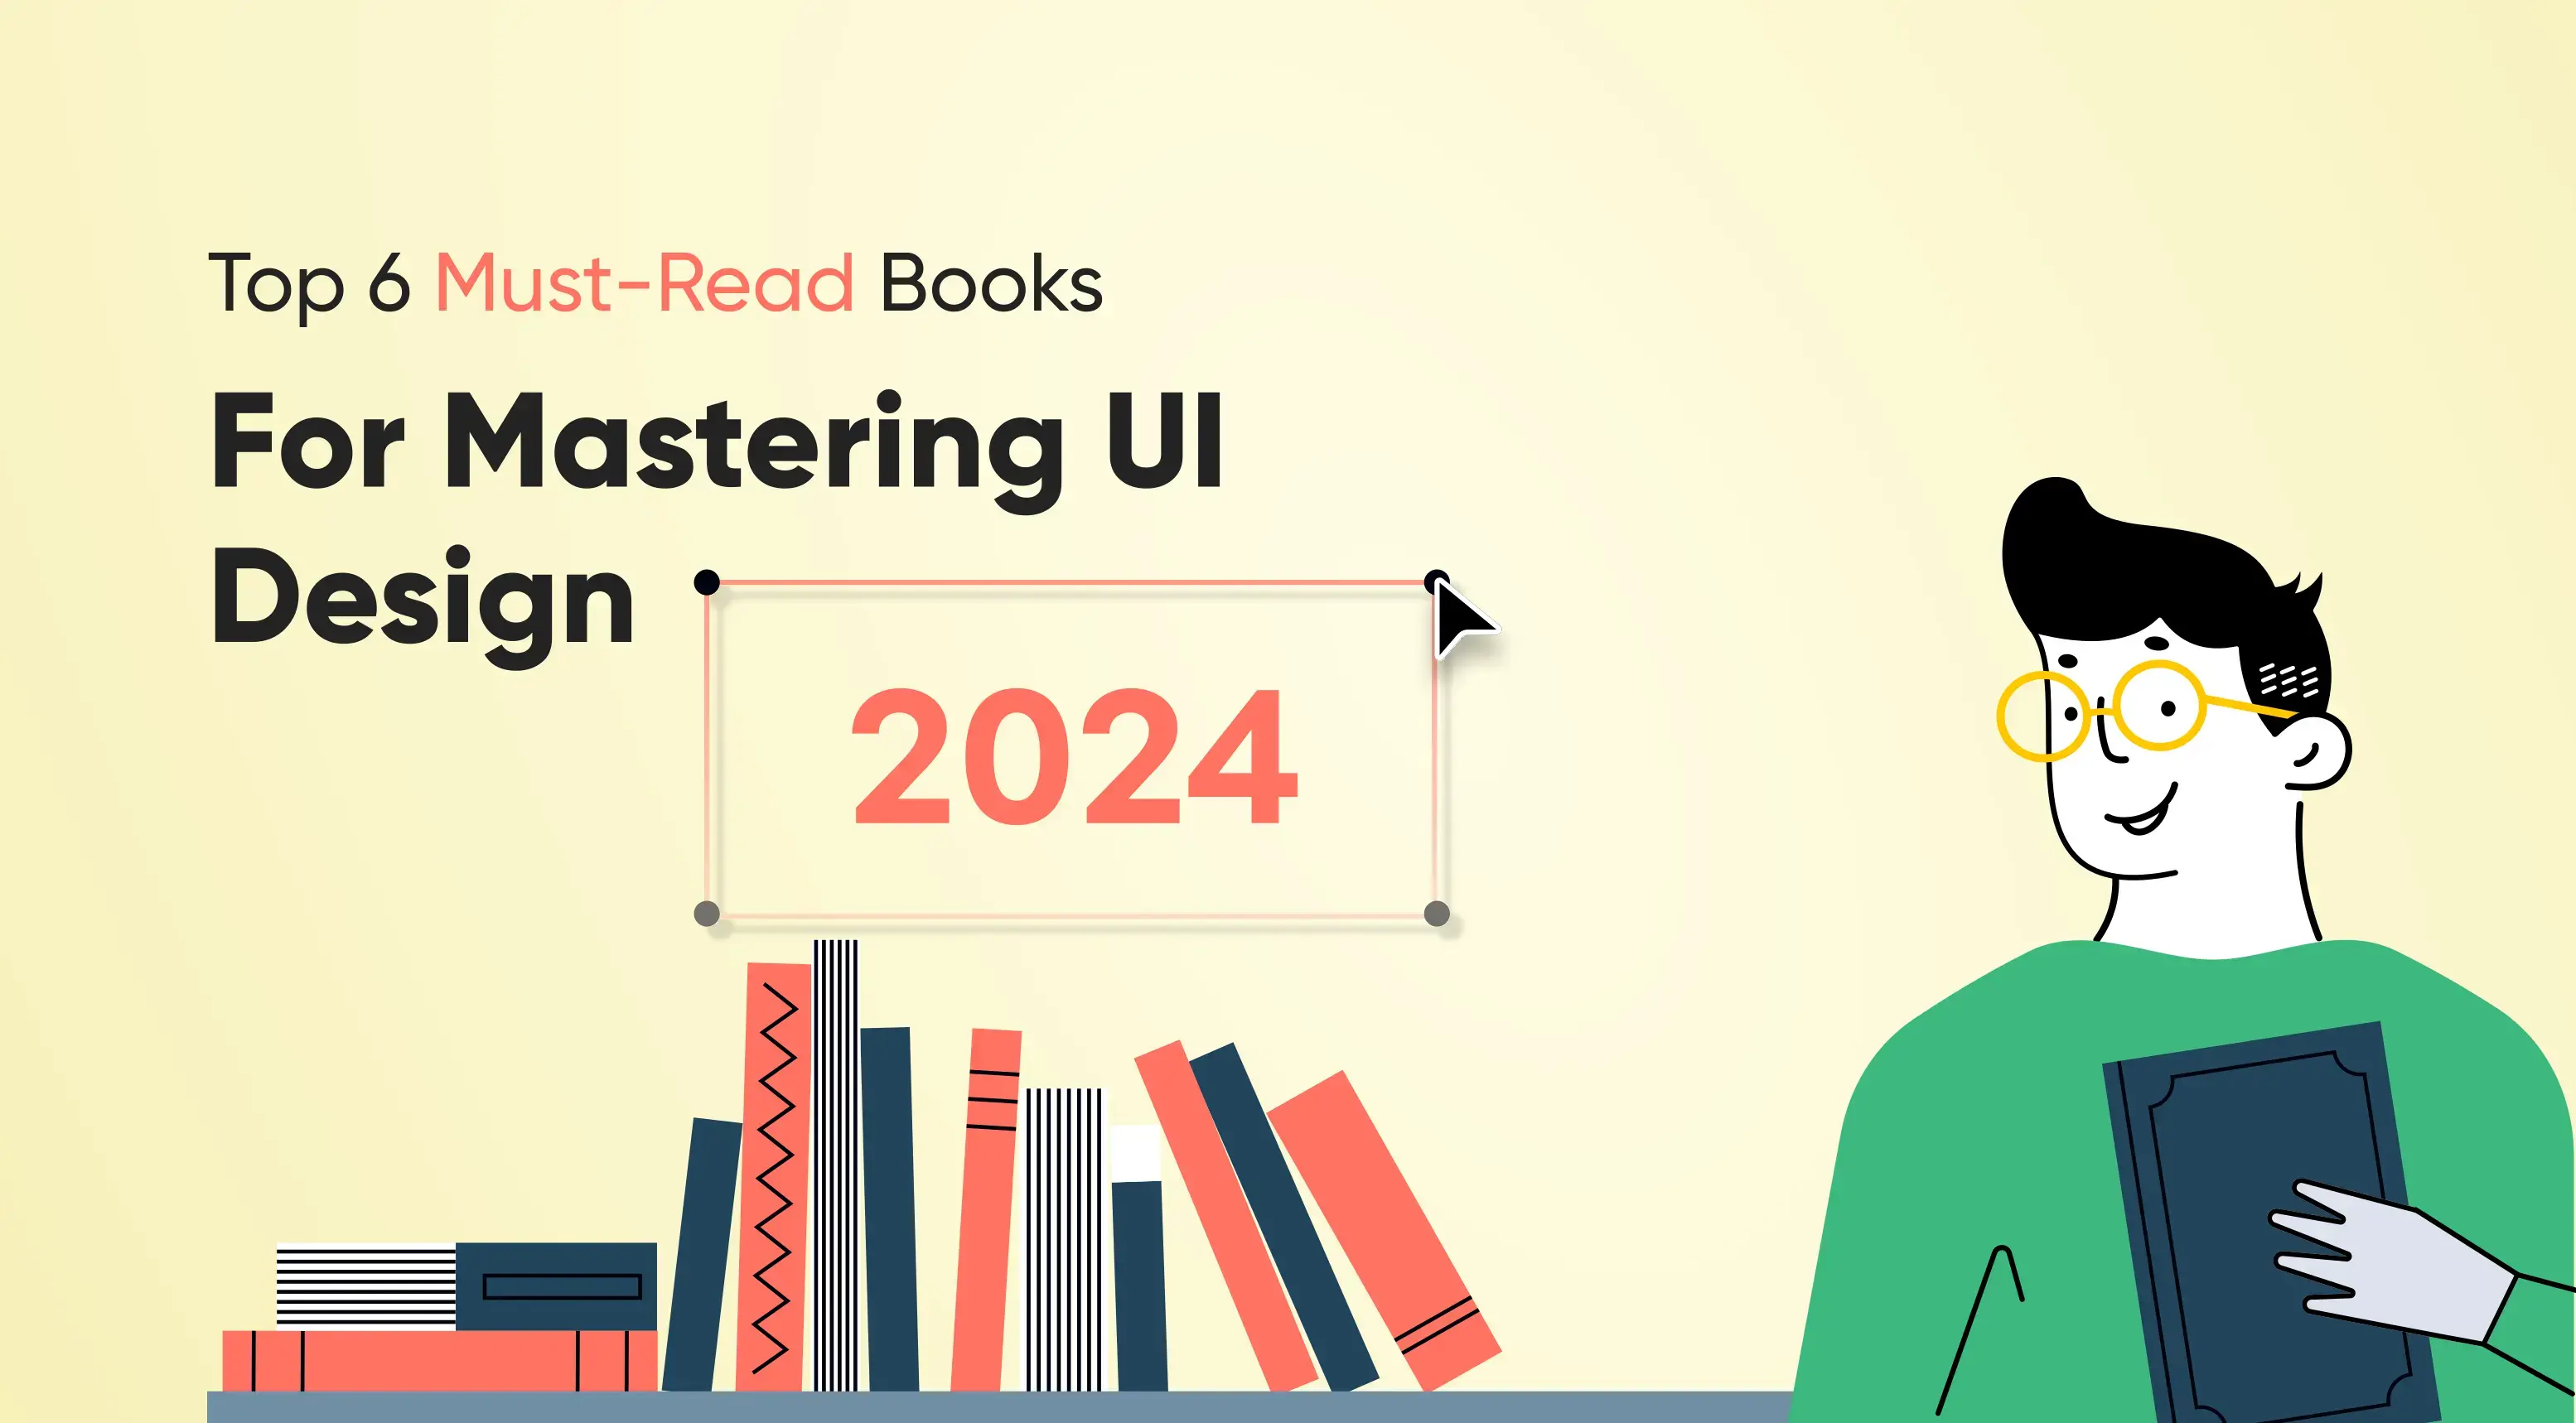 Top 6 Must-Read Books for Mastering UI Design in 2024